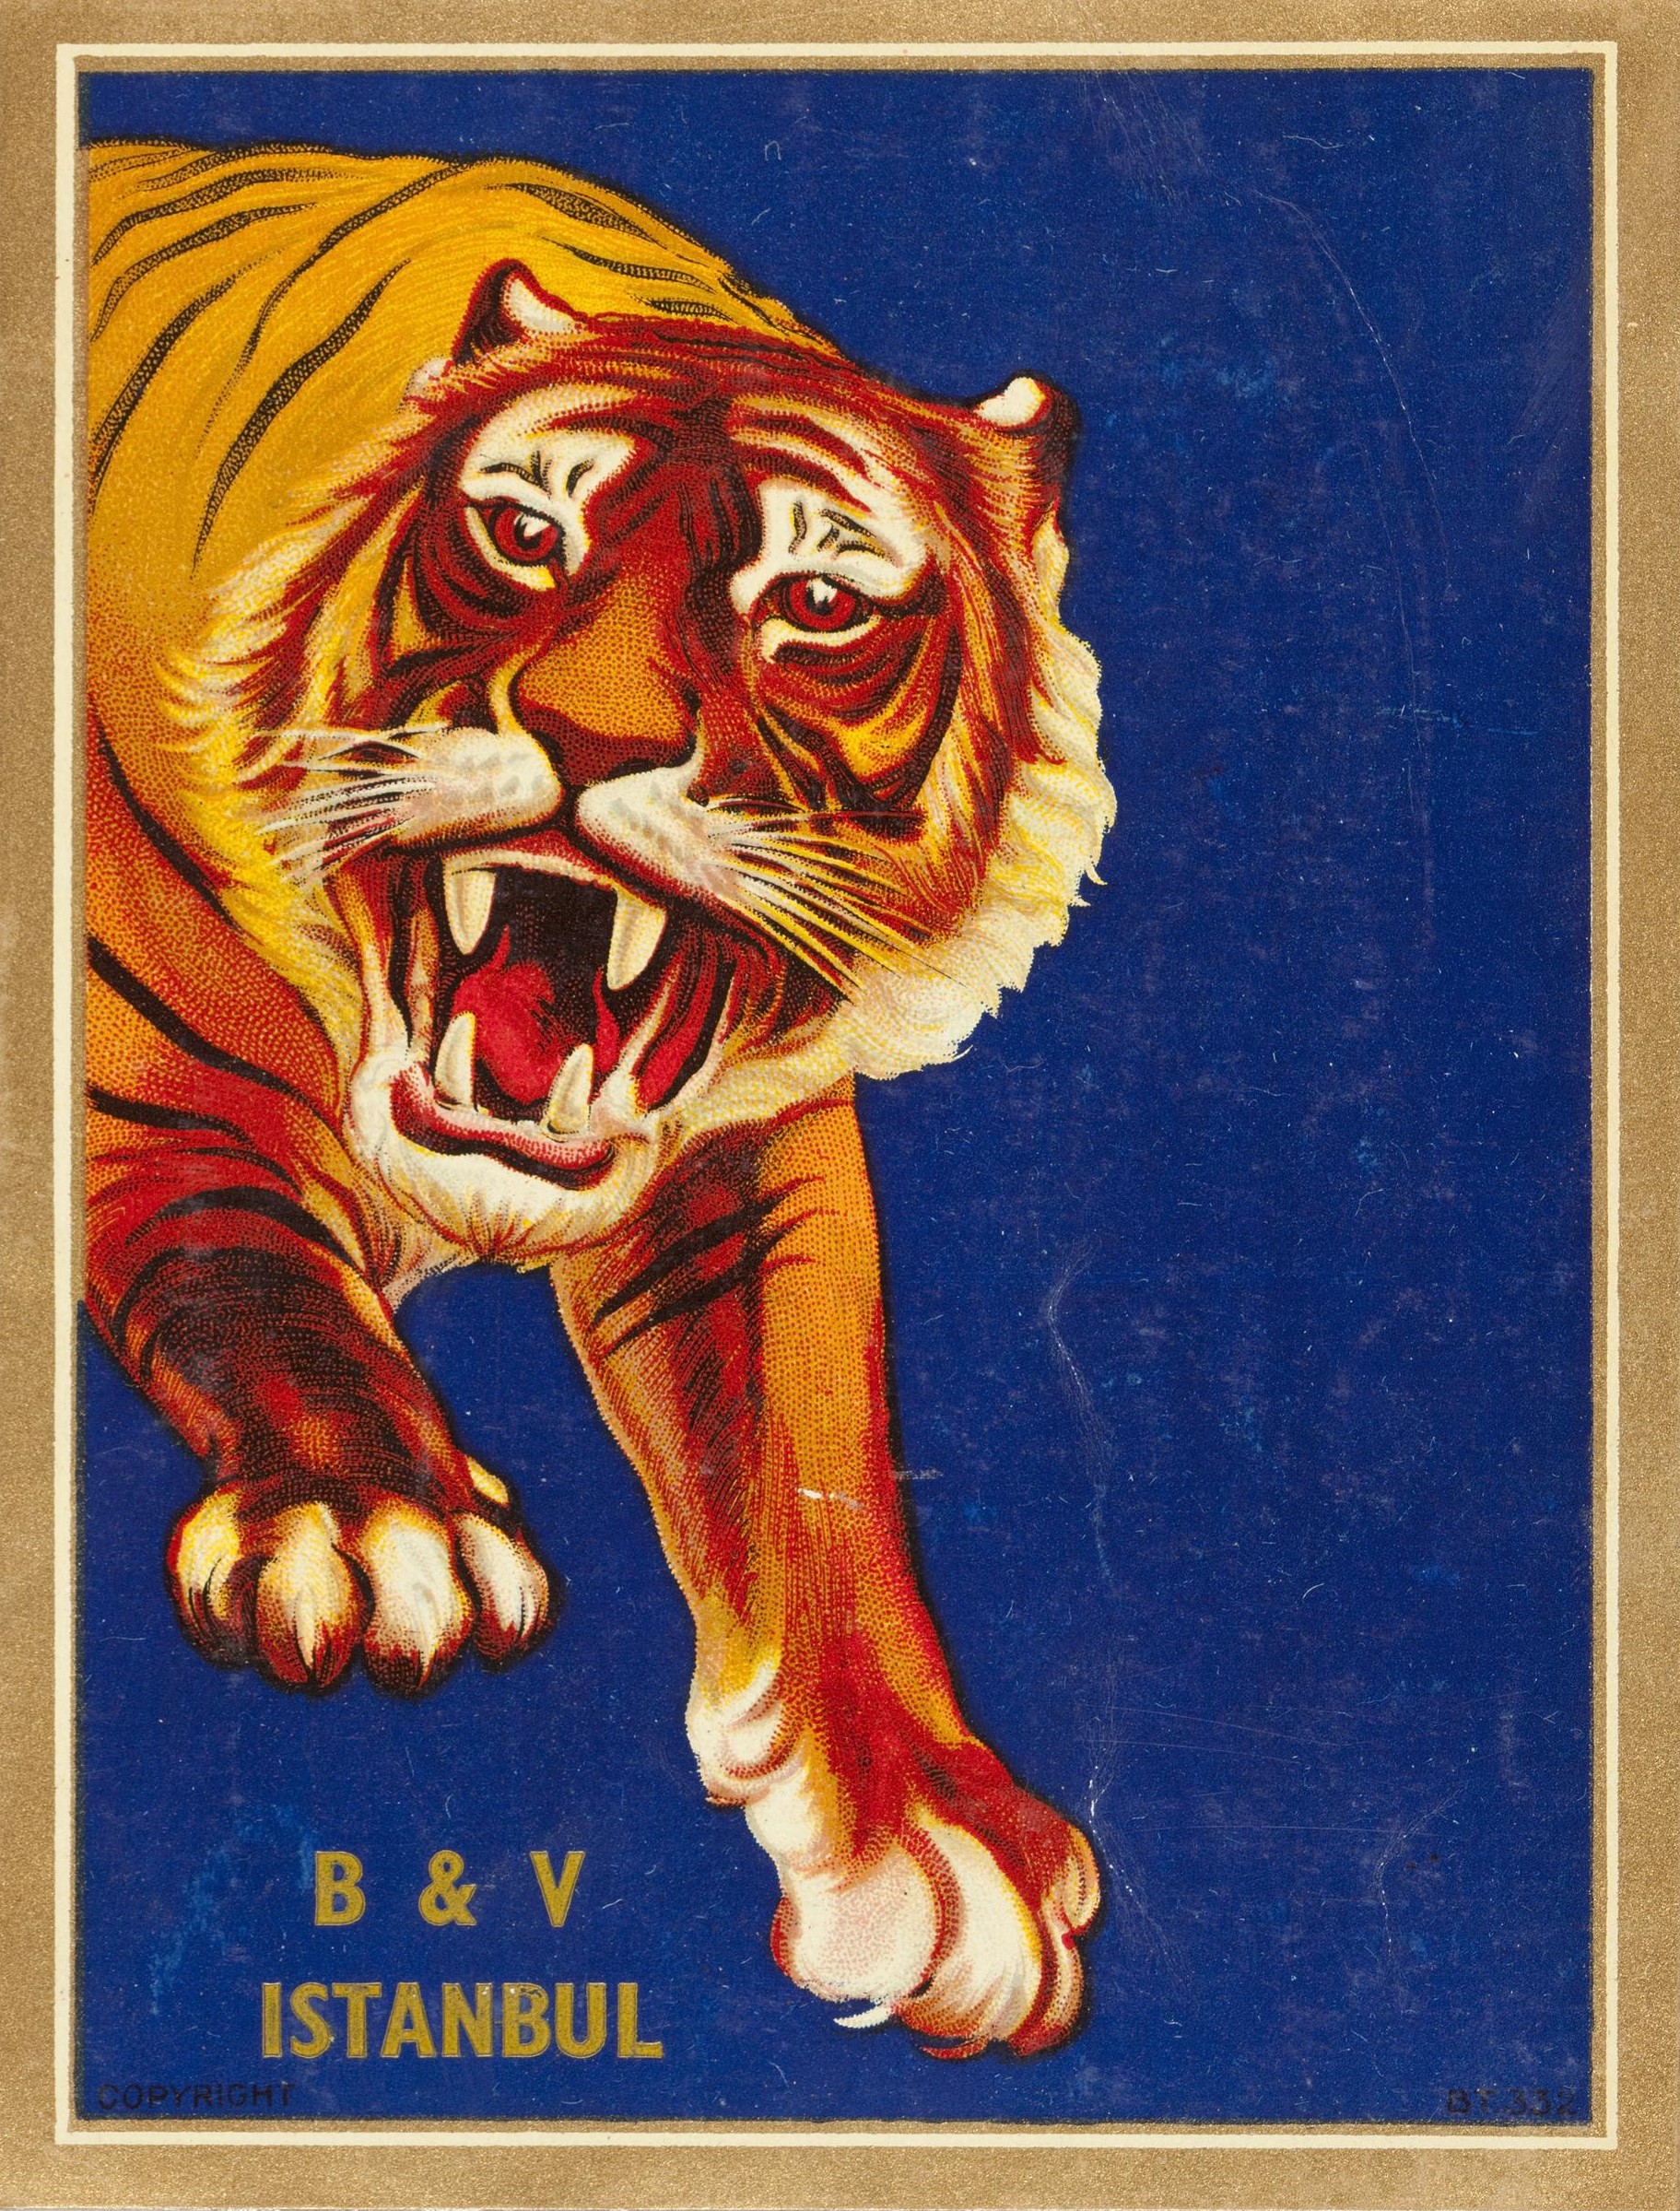 A shipper's ticket from the collection at the Museum of Science and Industry showing an oragne tiger roaring against a blue background